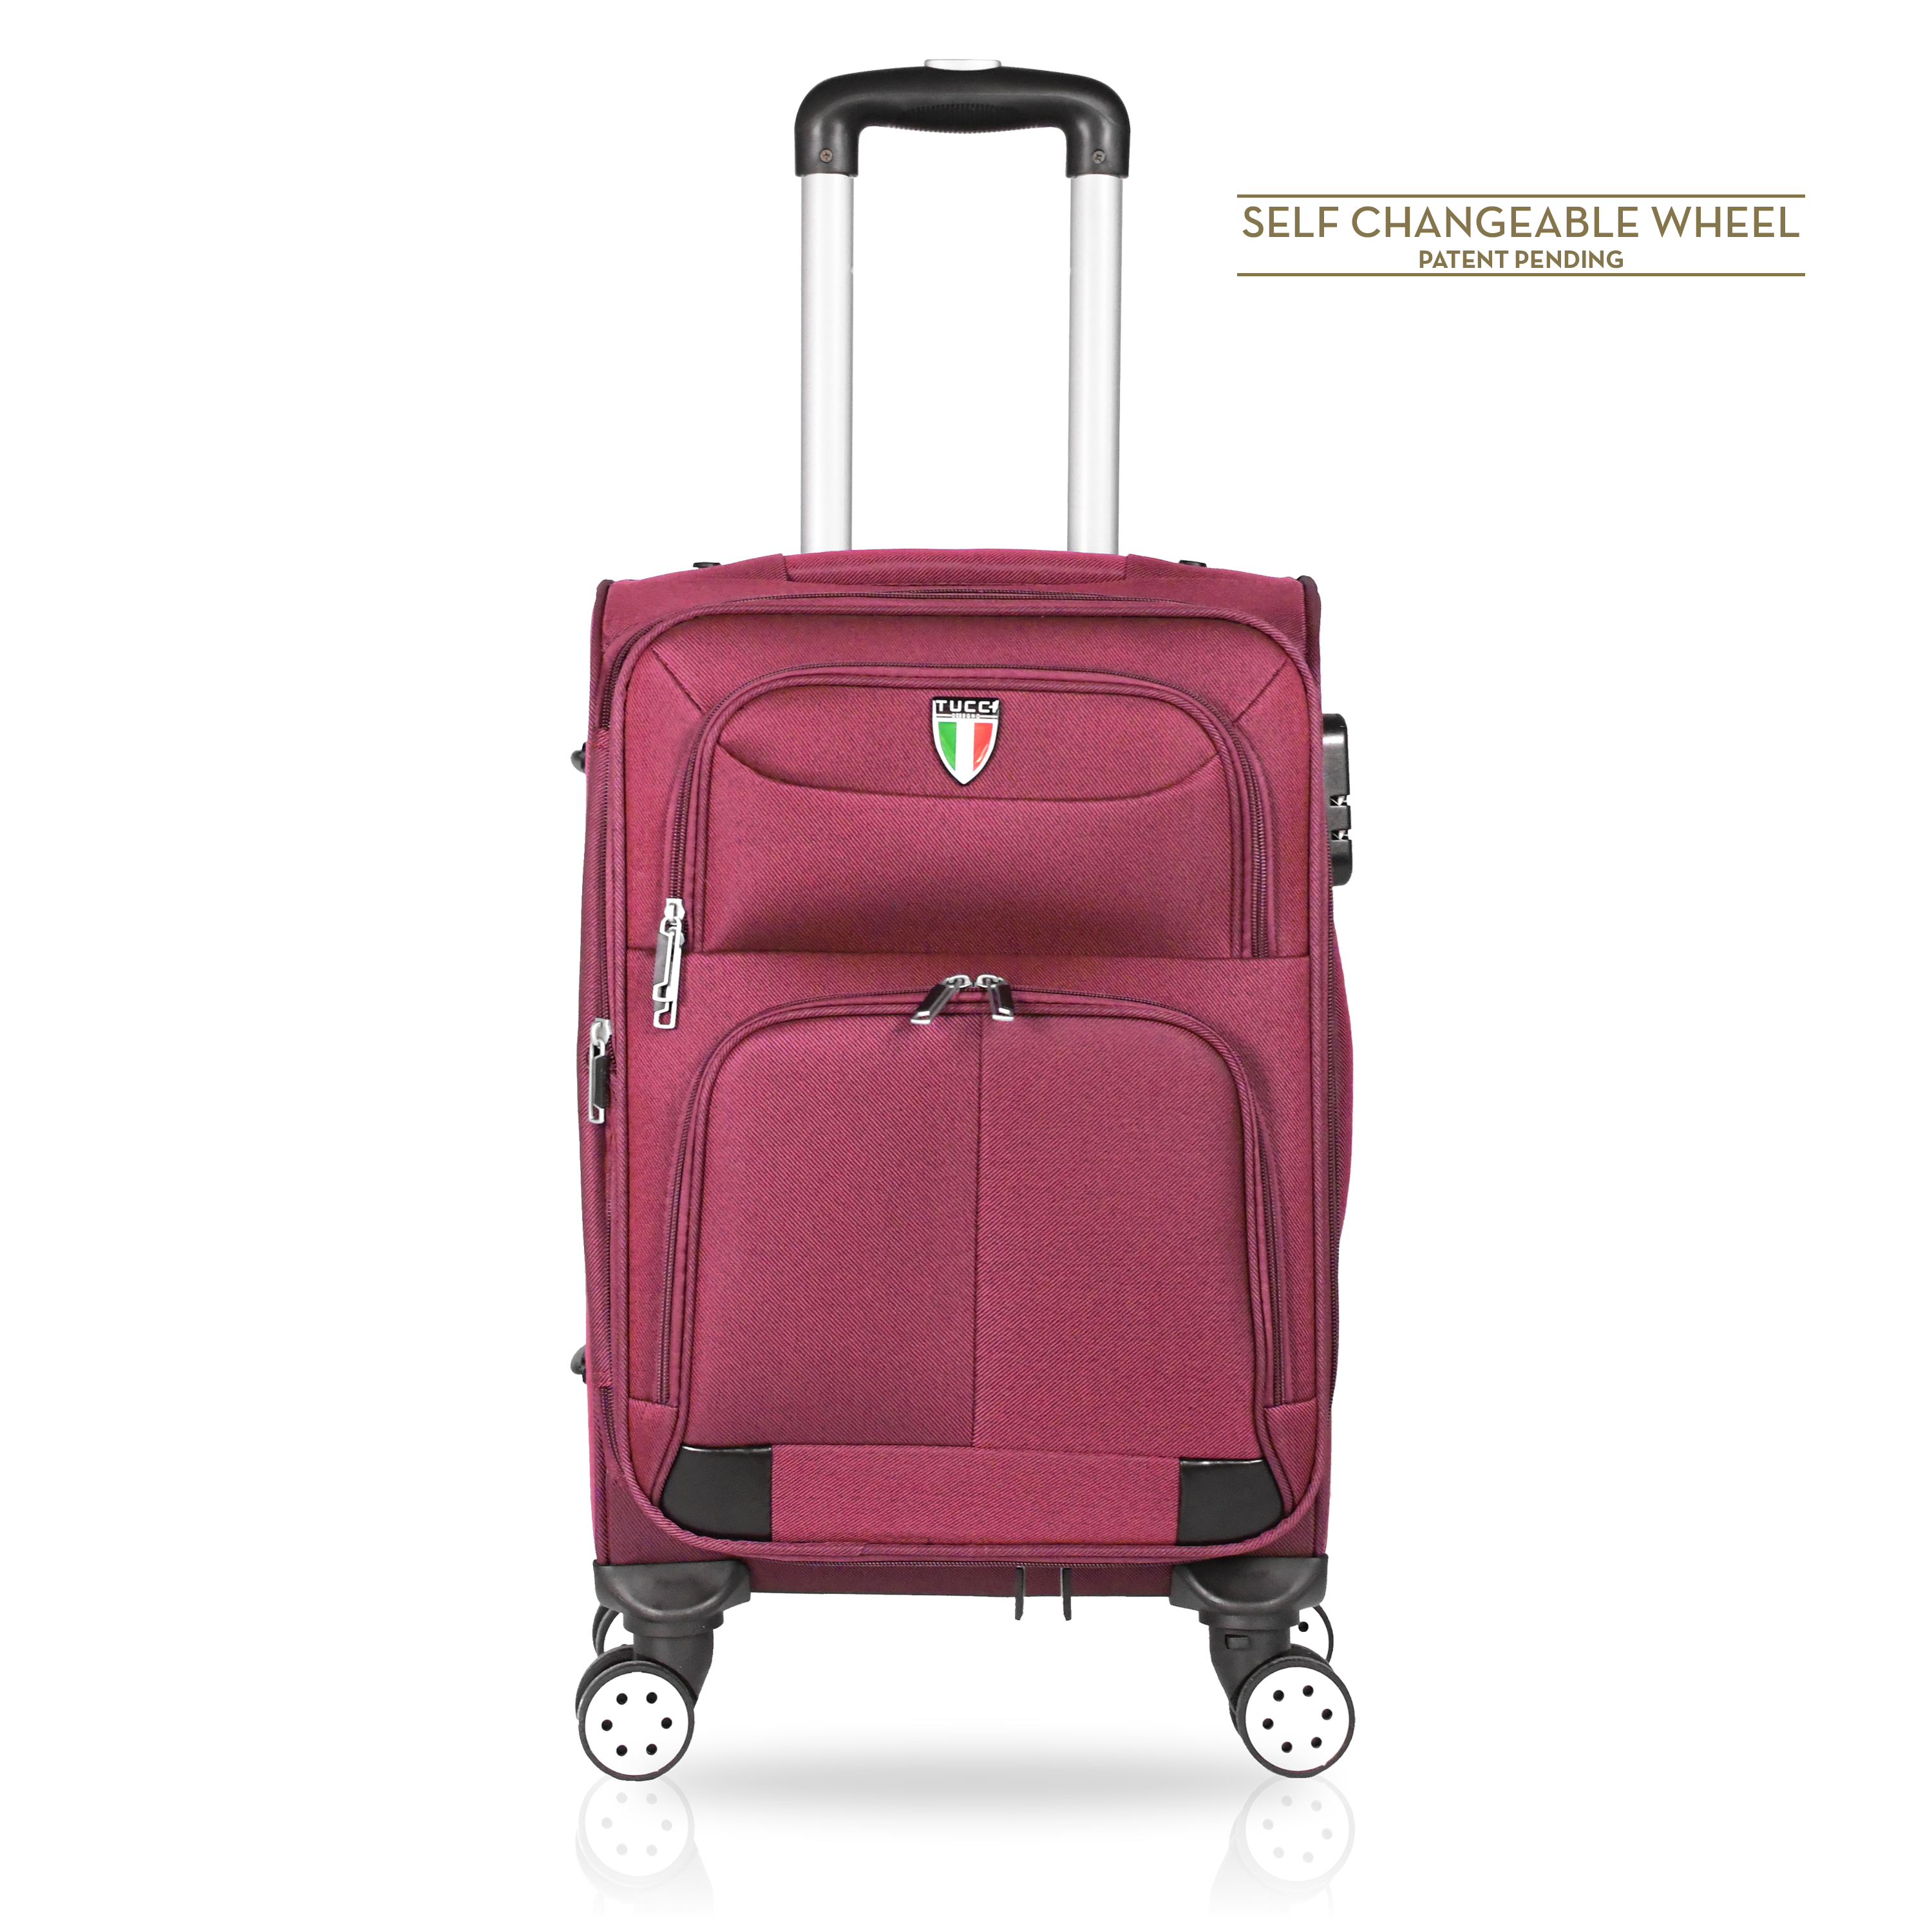 TUCCI Italy STRATI 4 PC (20", 28", 30", 32") Abs Travel Luggage Set